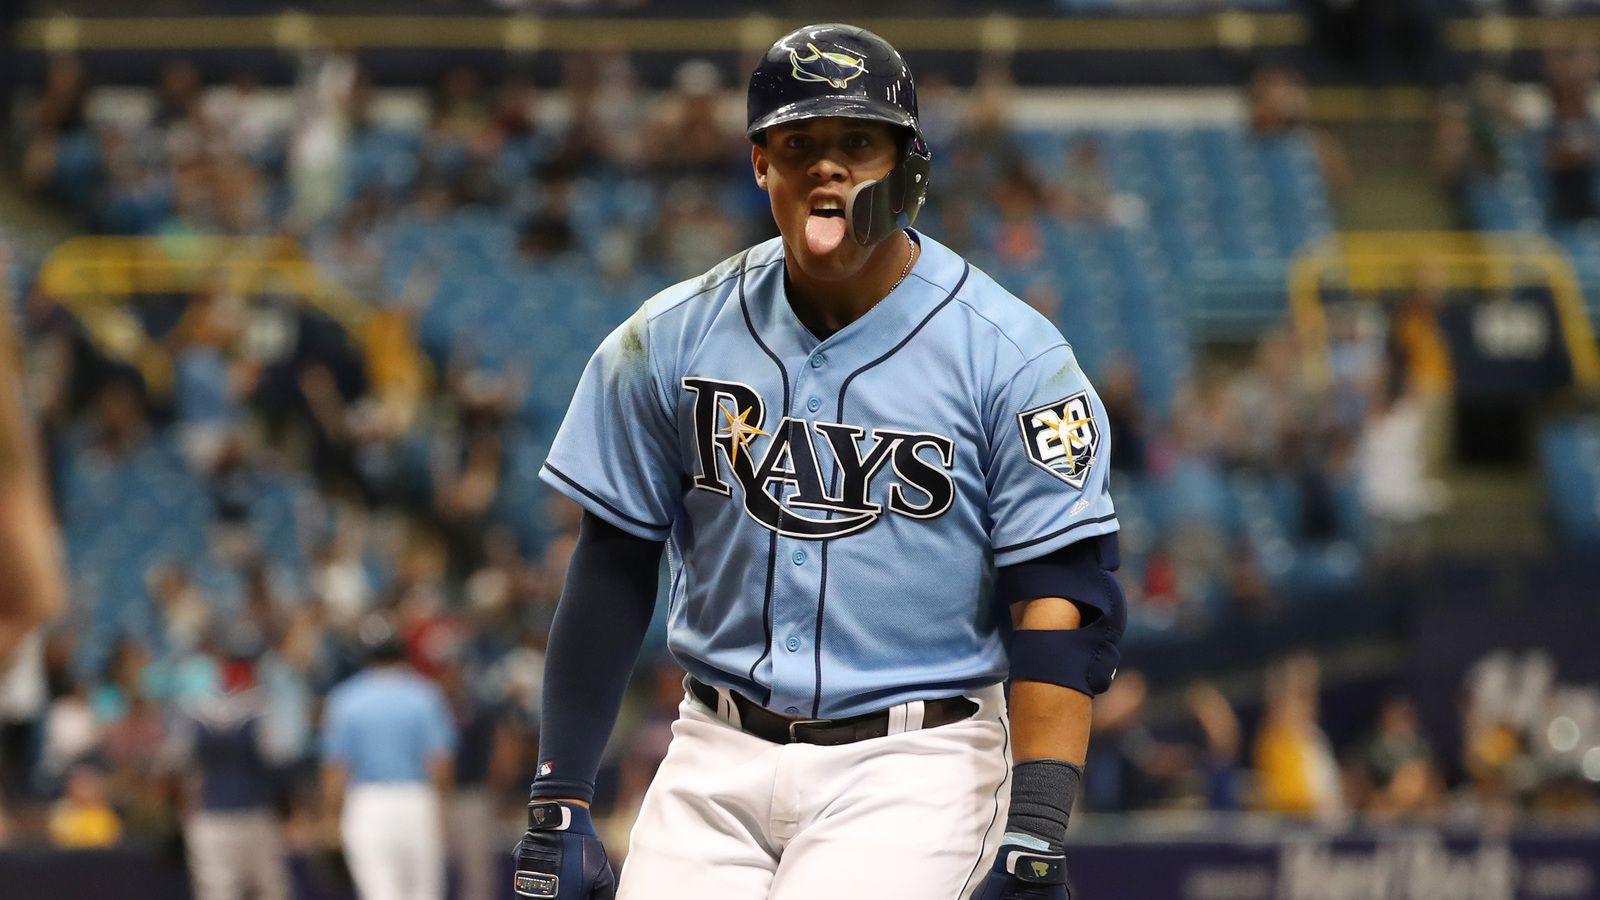 WATCH: Carlos Gomez snaps bat after strikeout, only to later hit